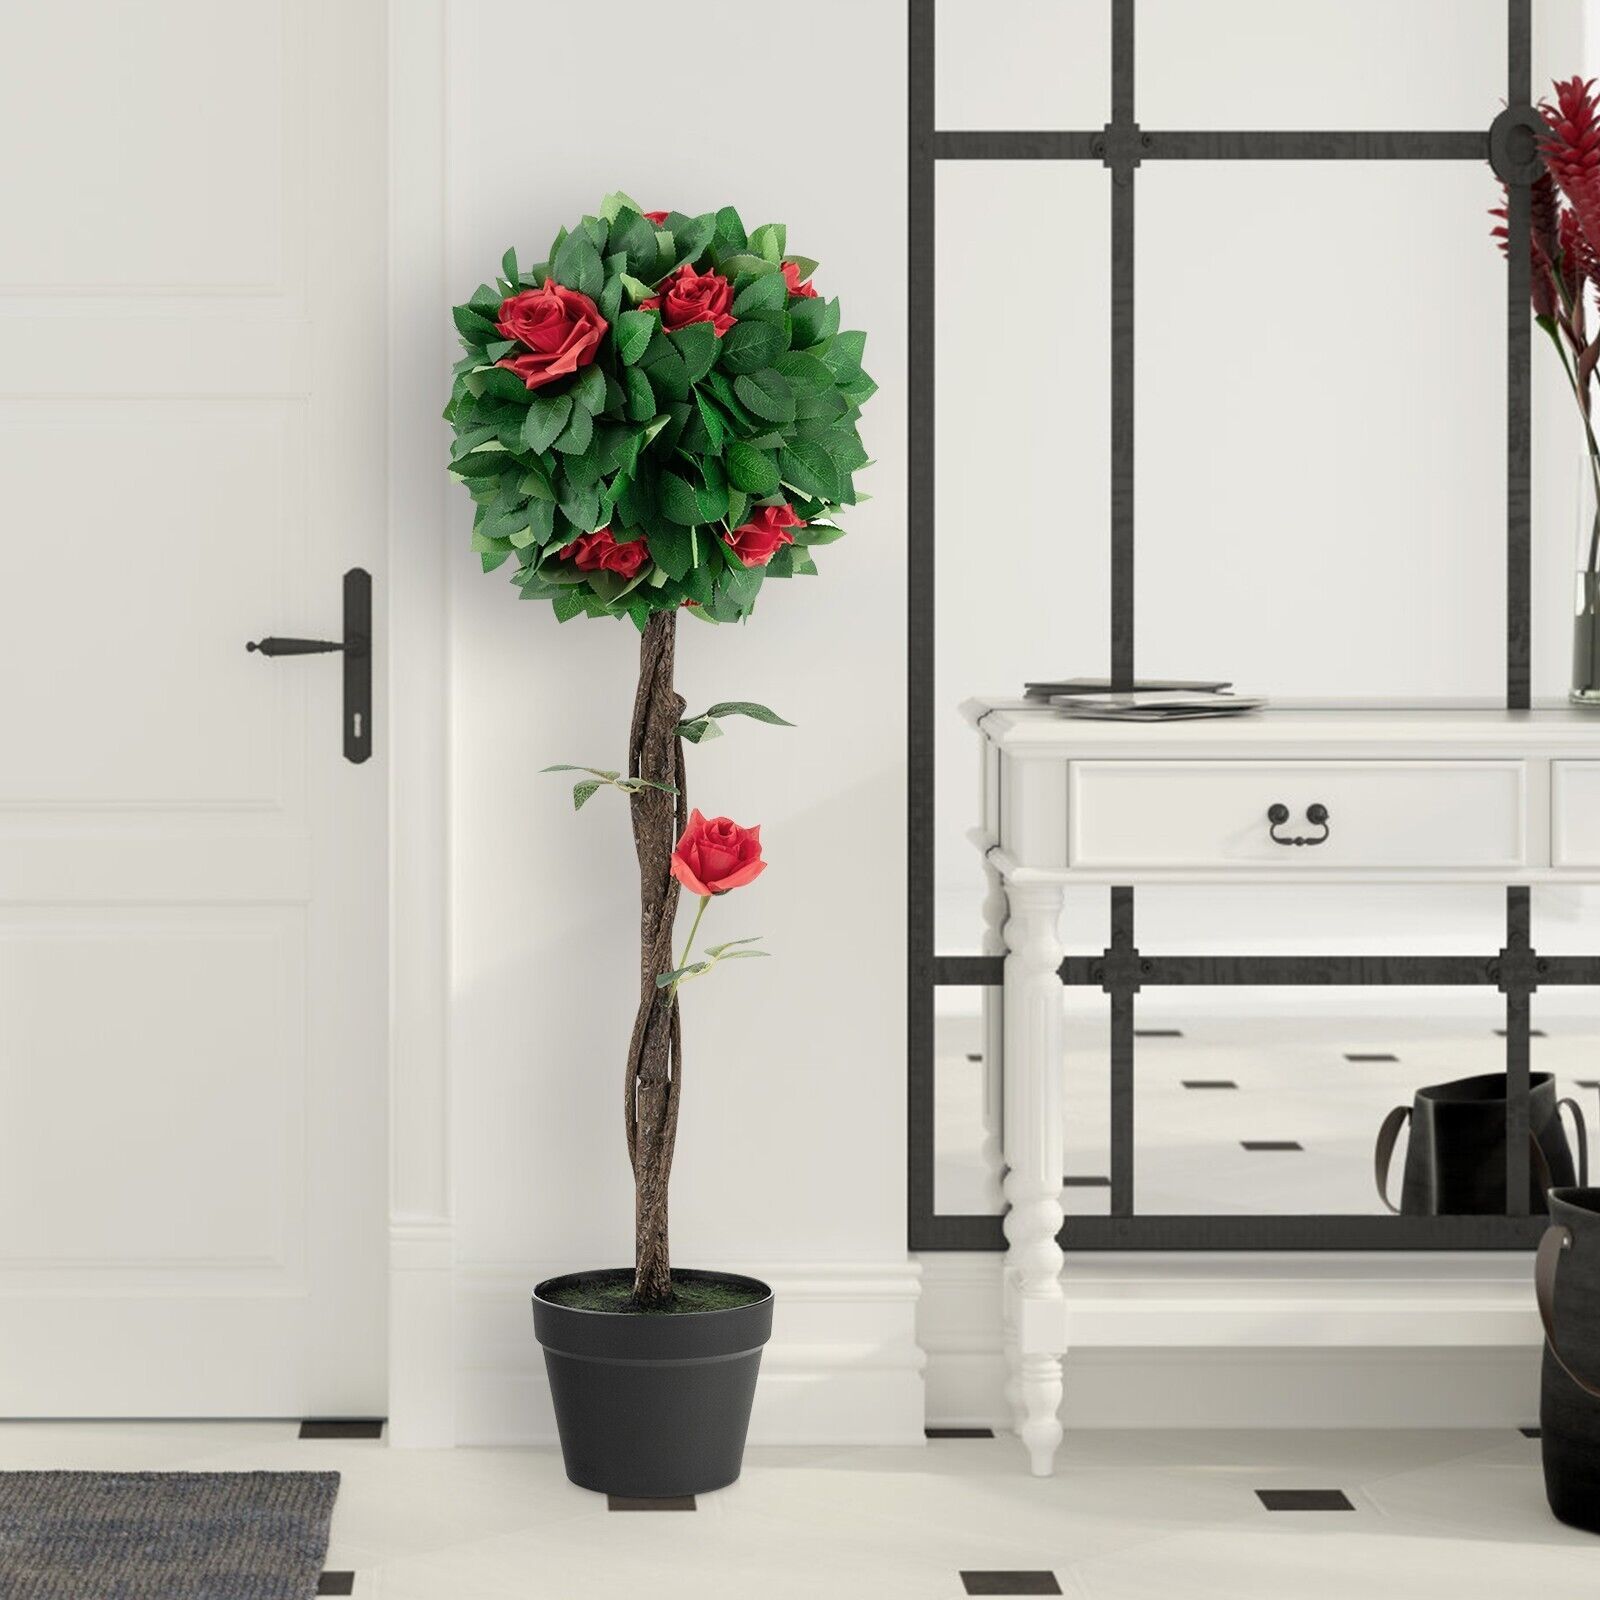 92cm Artificial Blooming Camellia Tree with 12 Red Flowers and Pot